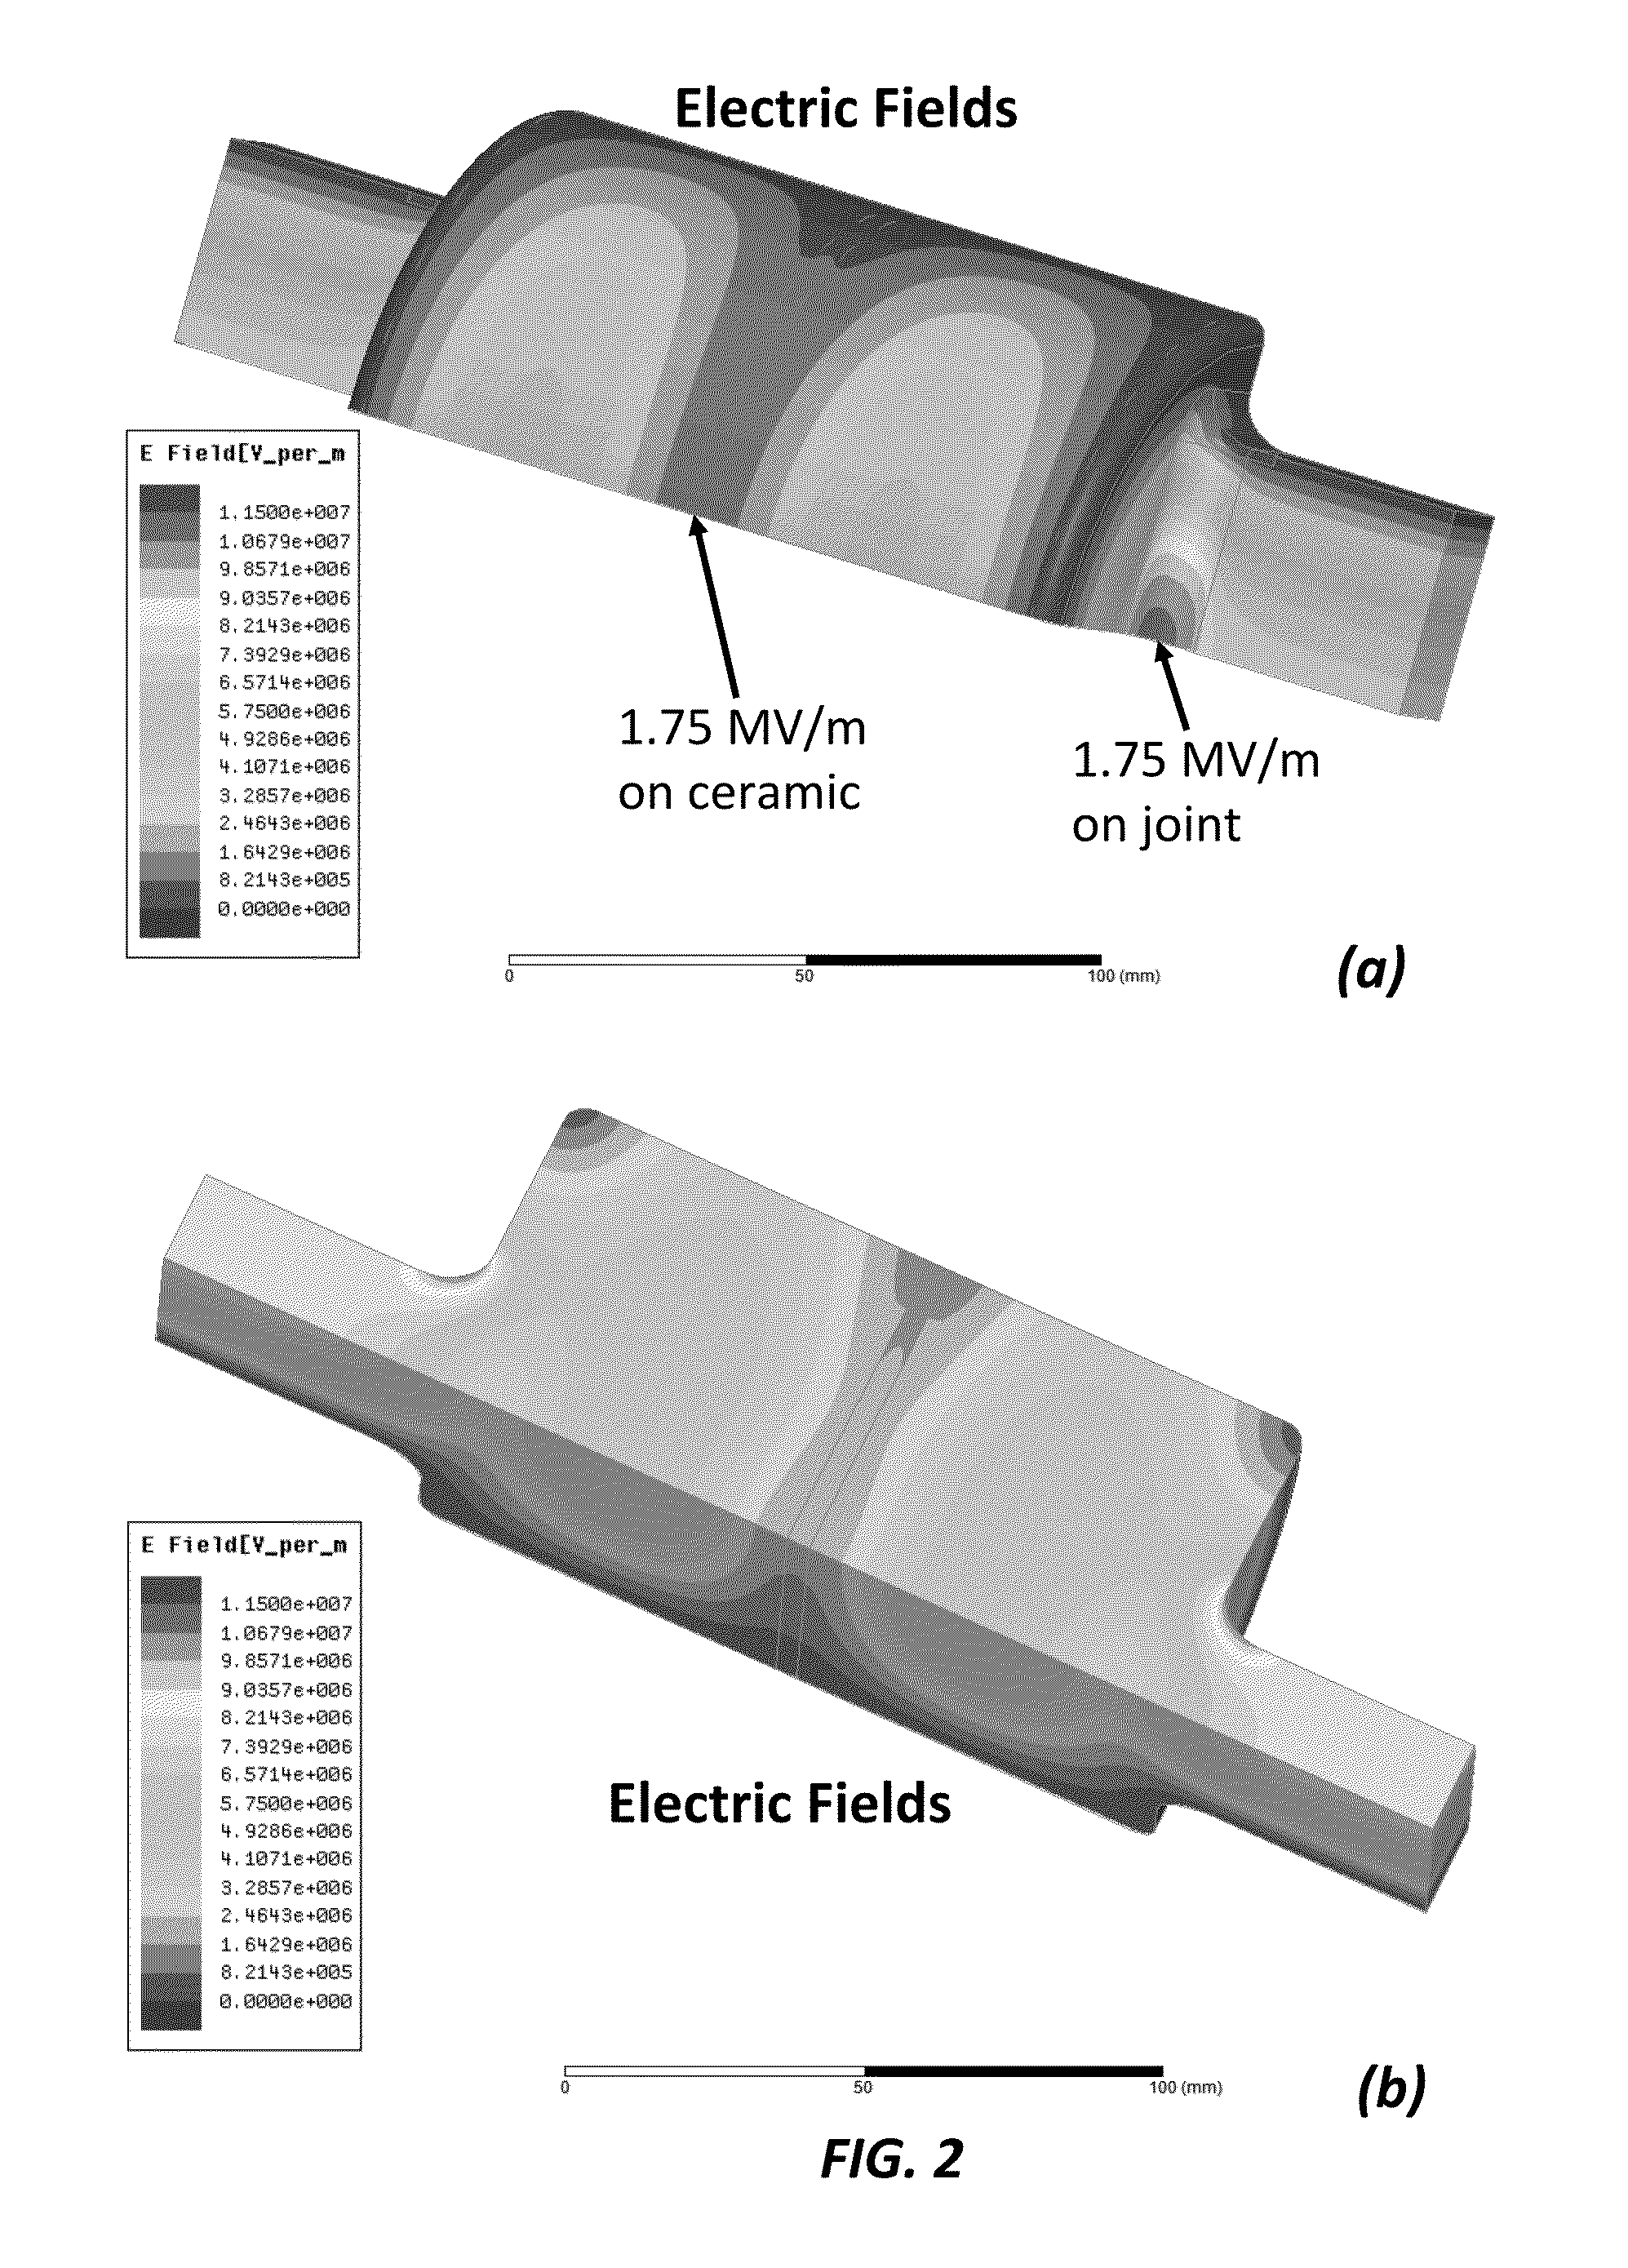 RF window assembly comprising a ceramic disk disposed within a cylindrical waveguide which is connected to rectangular waveguides through elliptical joints